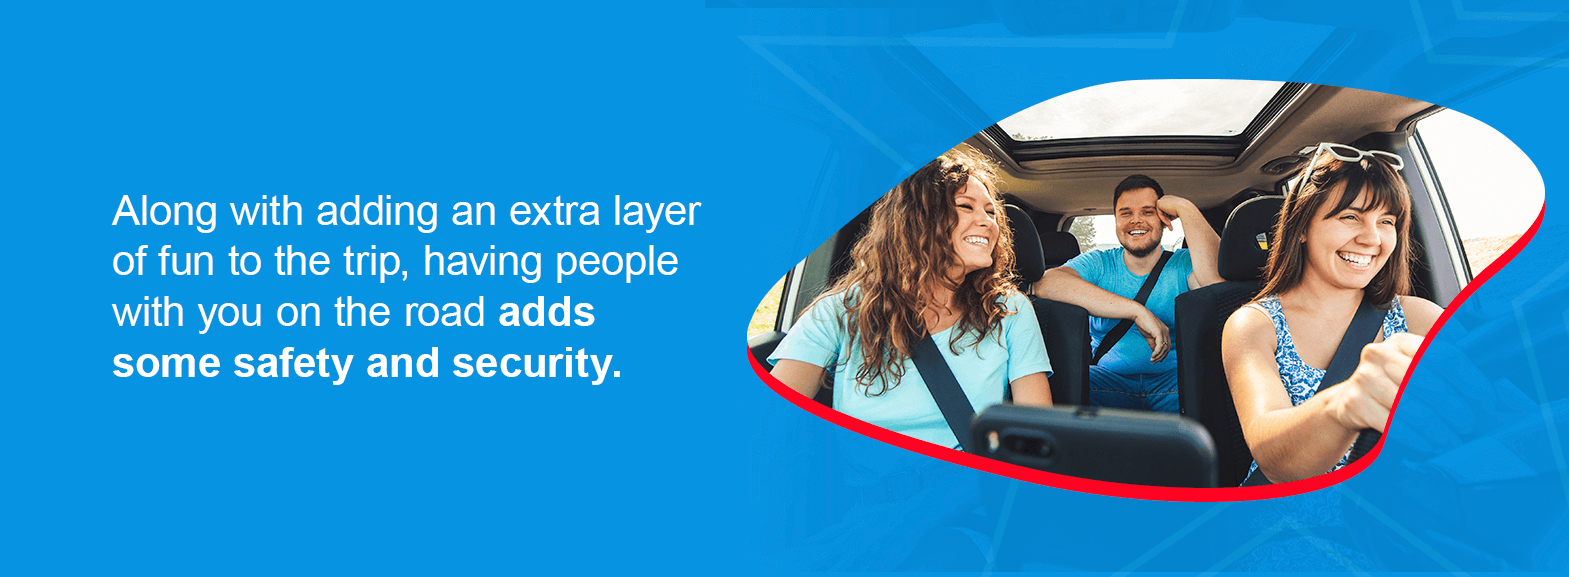 Along with adding an extra layer of fun to the trip, having people with you on the road adds some safety and security.